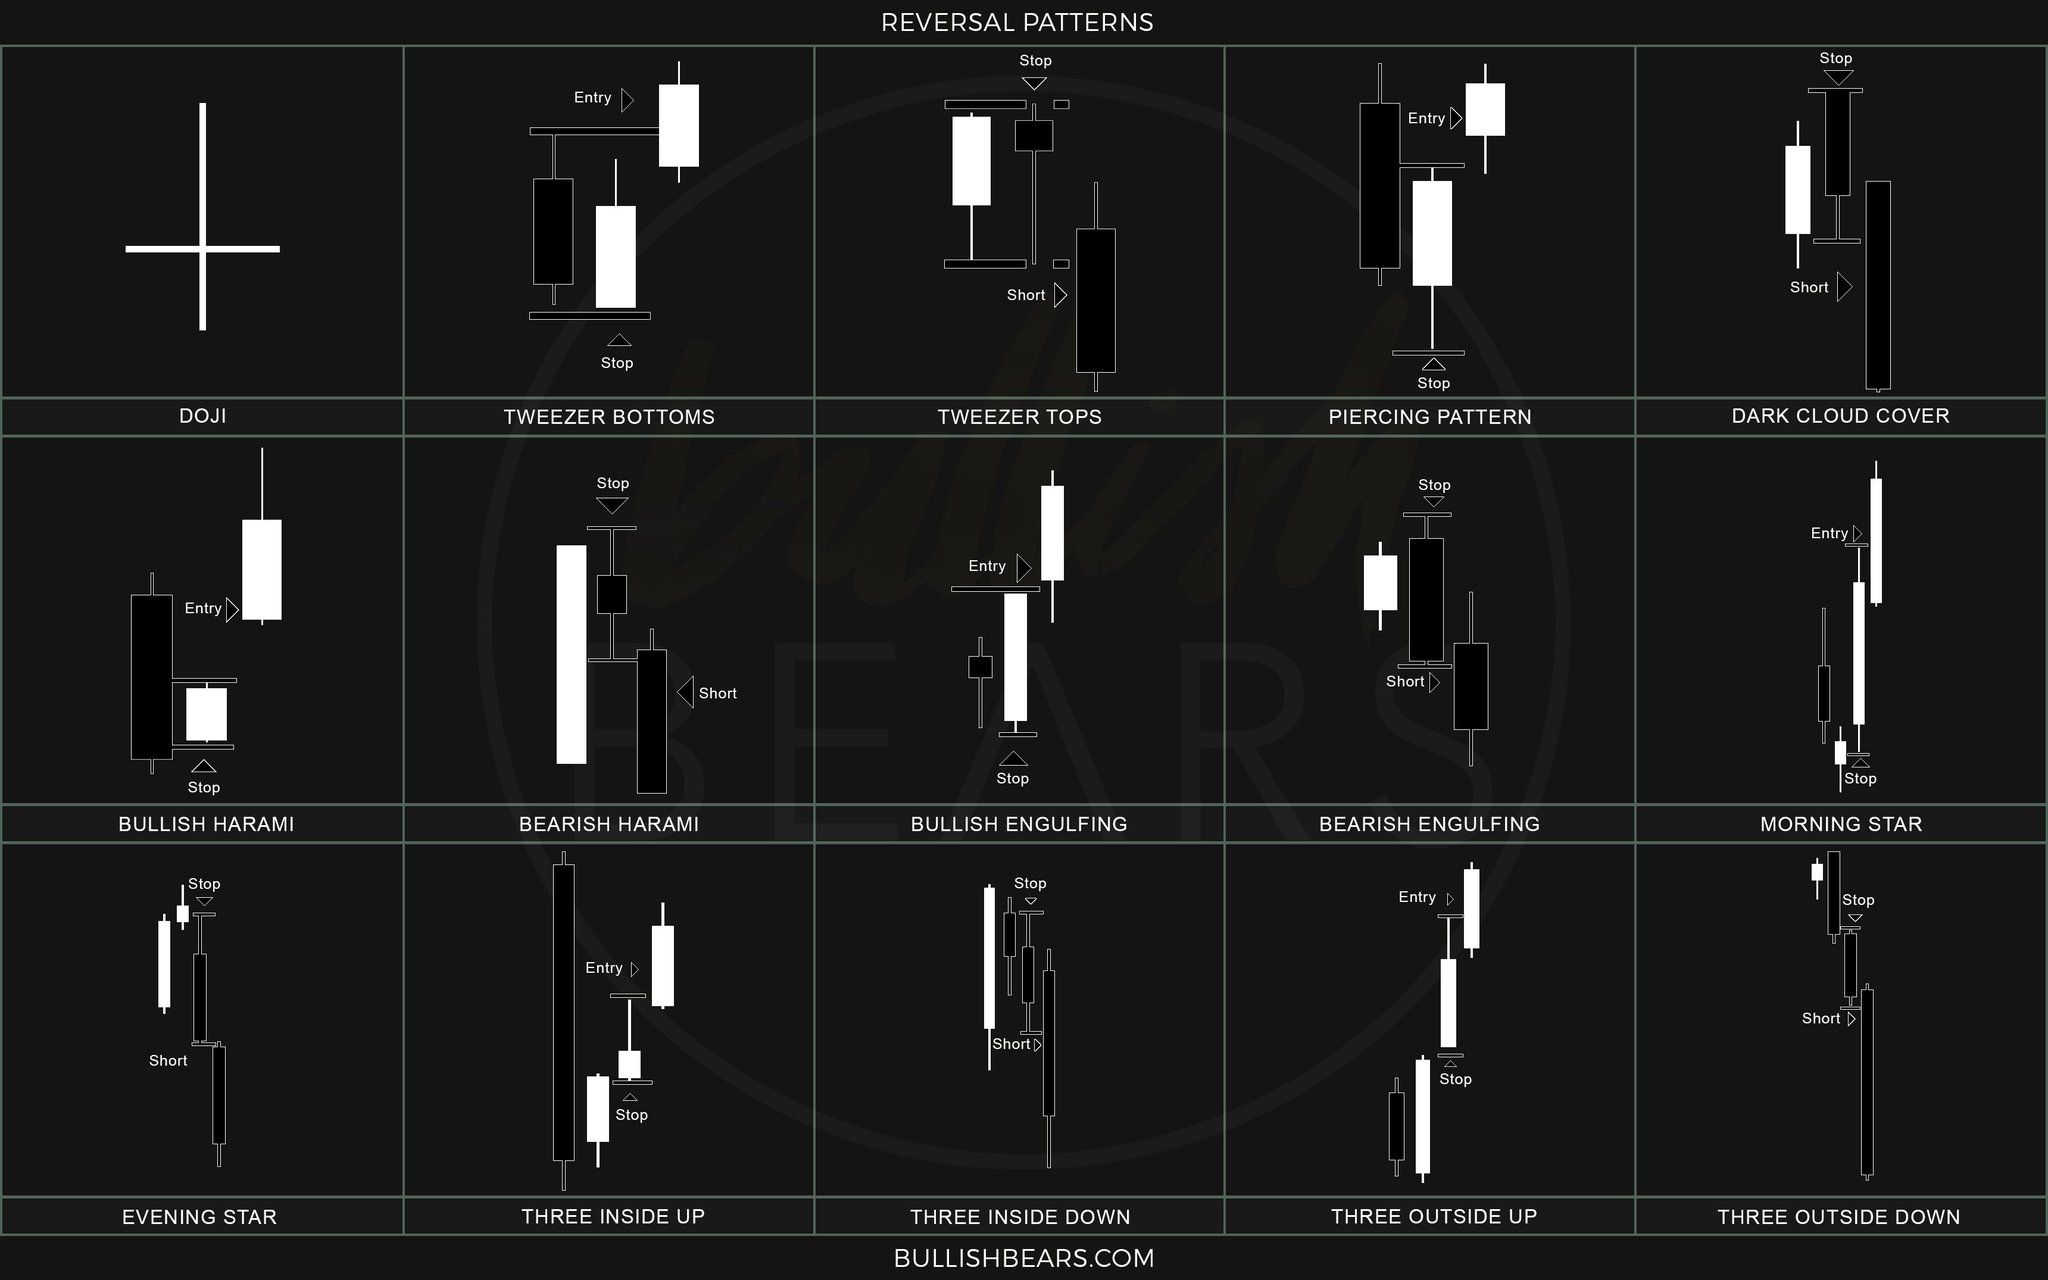 Bullish Bears Trading Community are the #wallpaper for # trading #candlesticks that you've all been waiting for! #Stocks #trade #daytrader #swingtrader #stockmarket #money #forext #crypto #investing #invest #daytrade #swingtrade